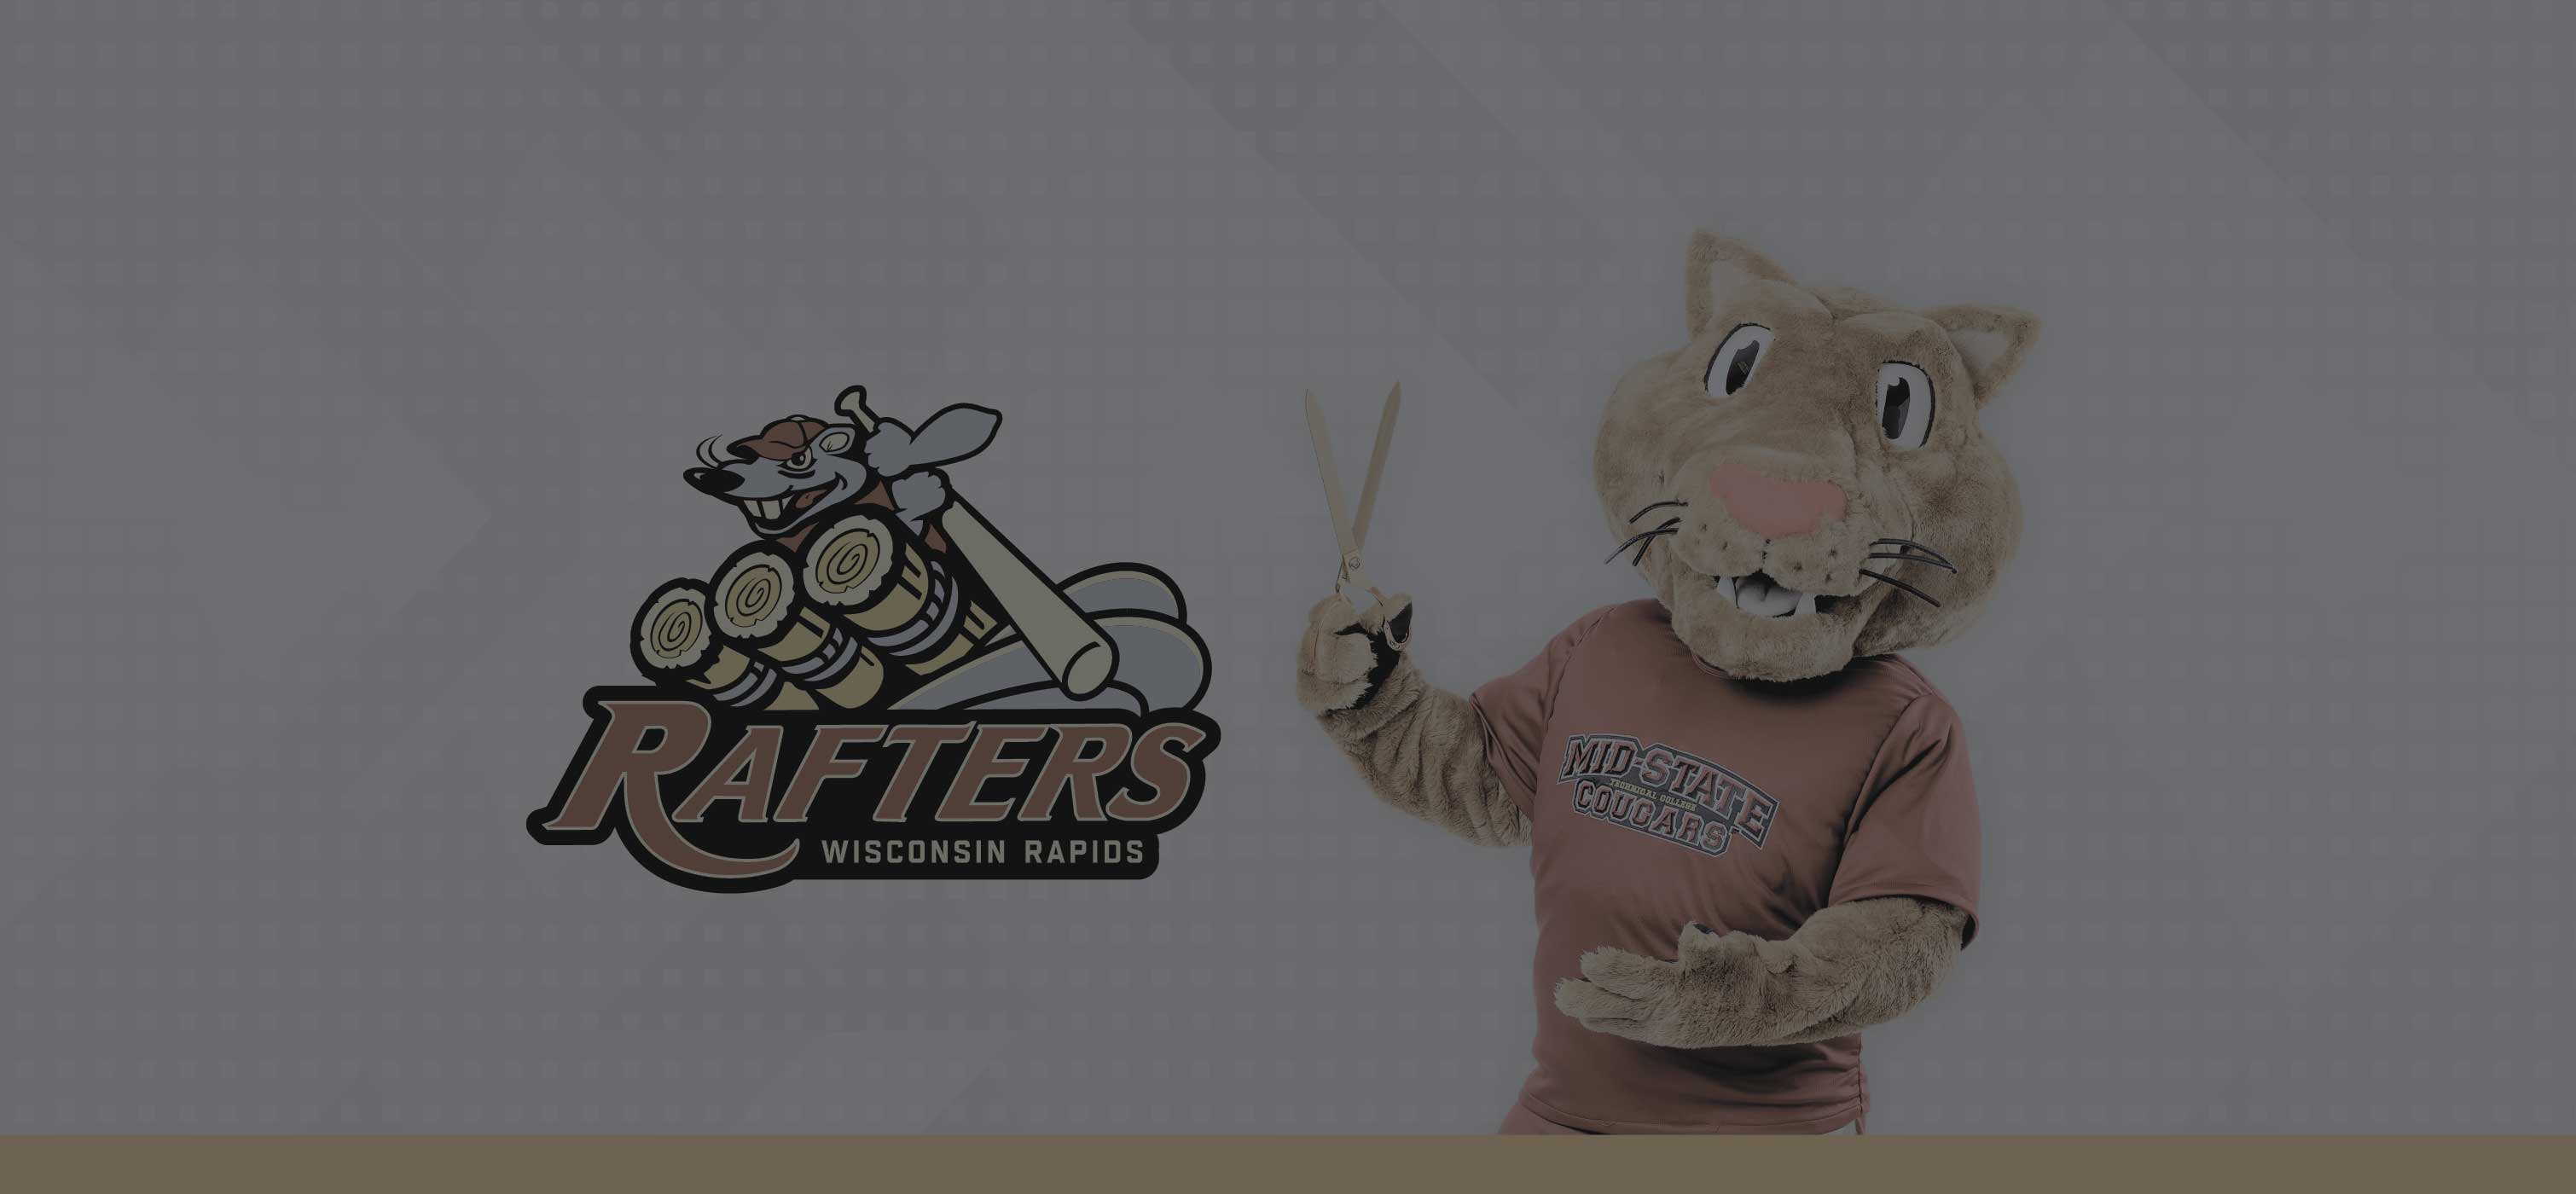 Mid-State mascot Grit holding a scissors next to Wisconsin Rapids Rafters logo